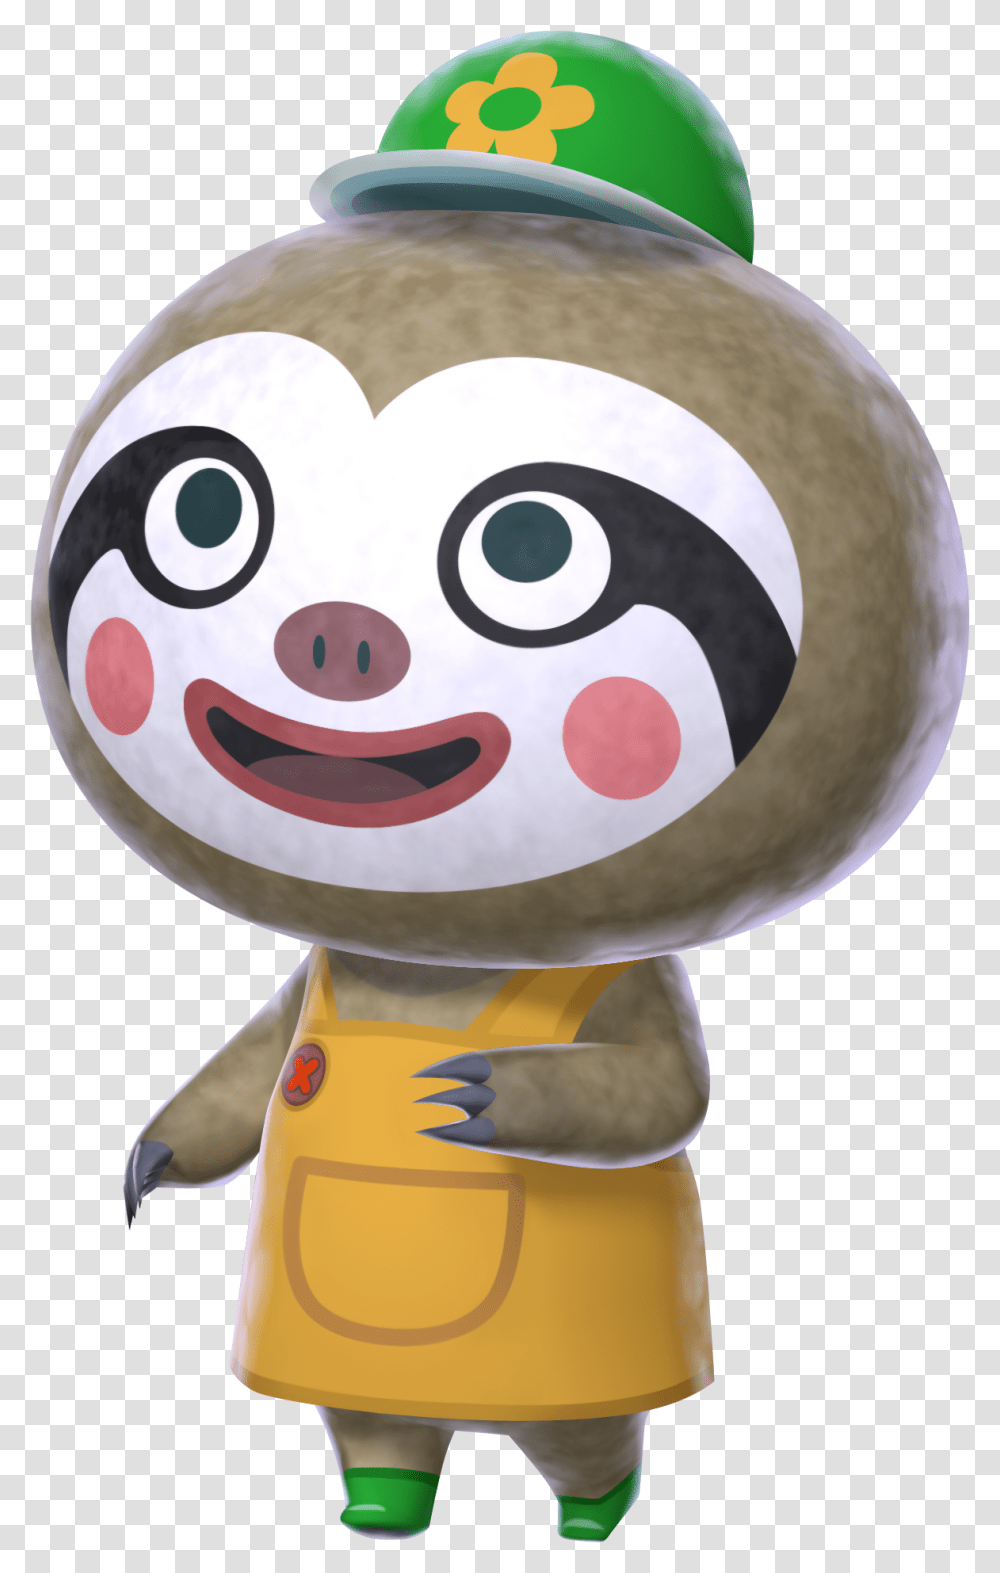 Sloth Character Leaf Animal Crossing, Toy, Mascot, Plant, Figurine Transparent Png